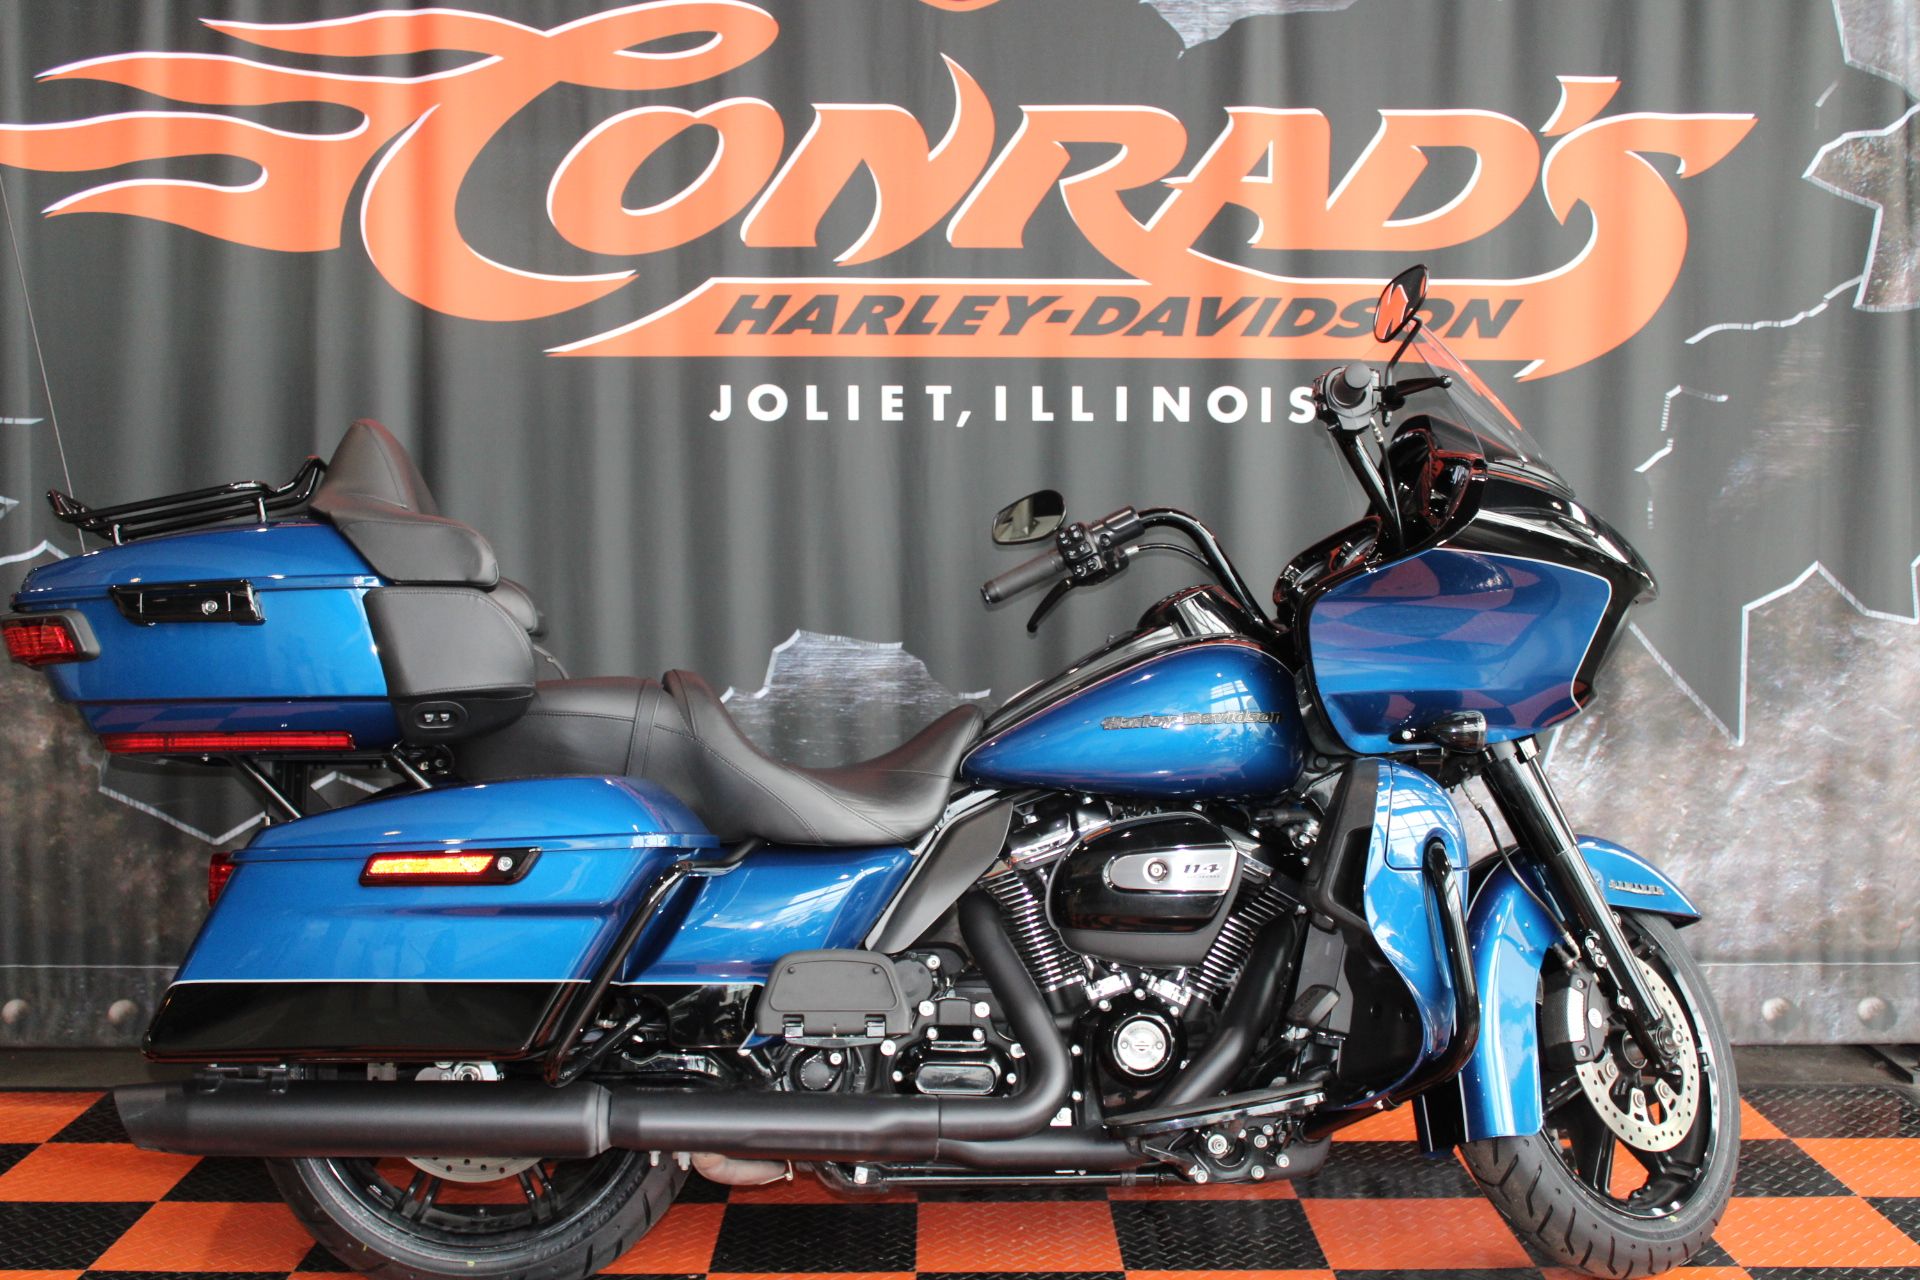 2022 Harley-Davidson Road Glide® Limited in Shorewood, Illinois - Photo 2